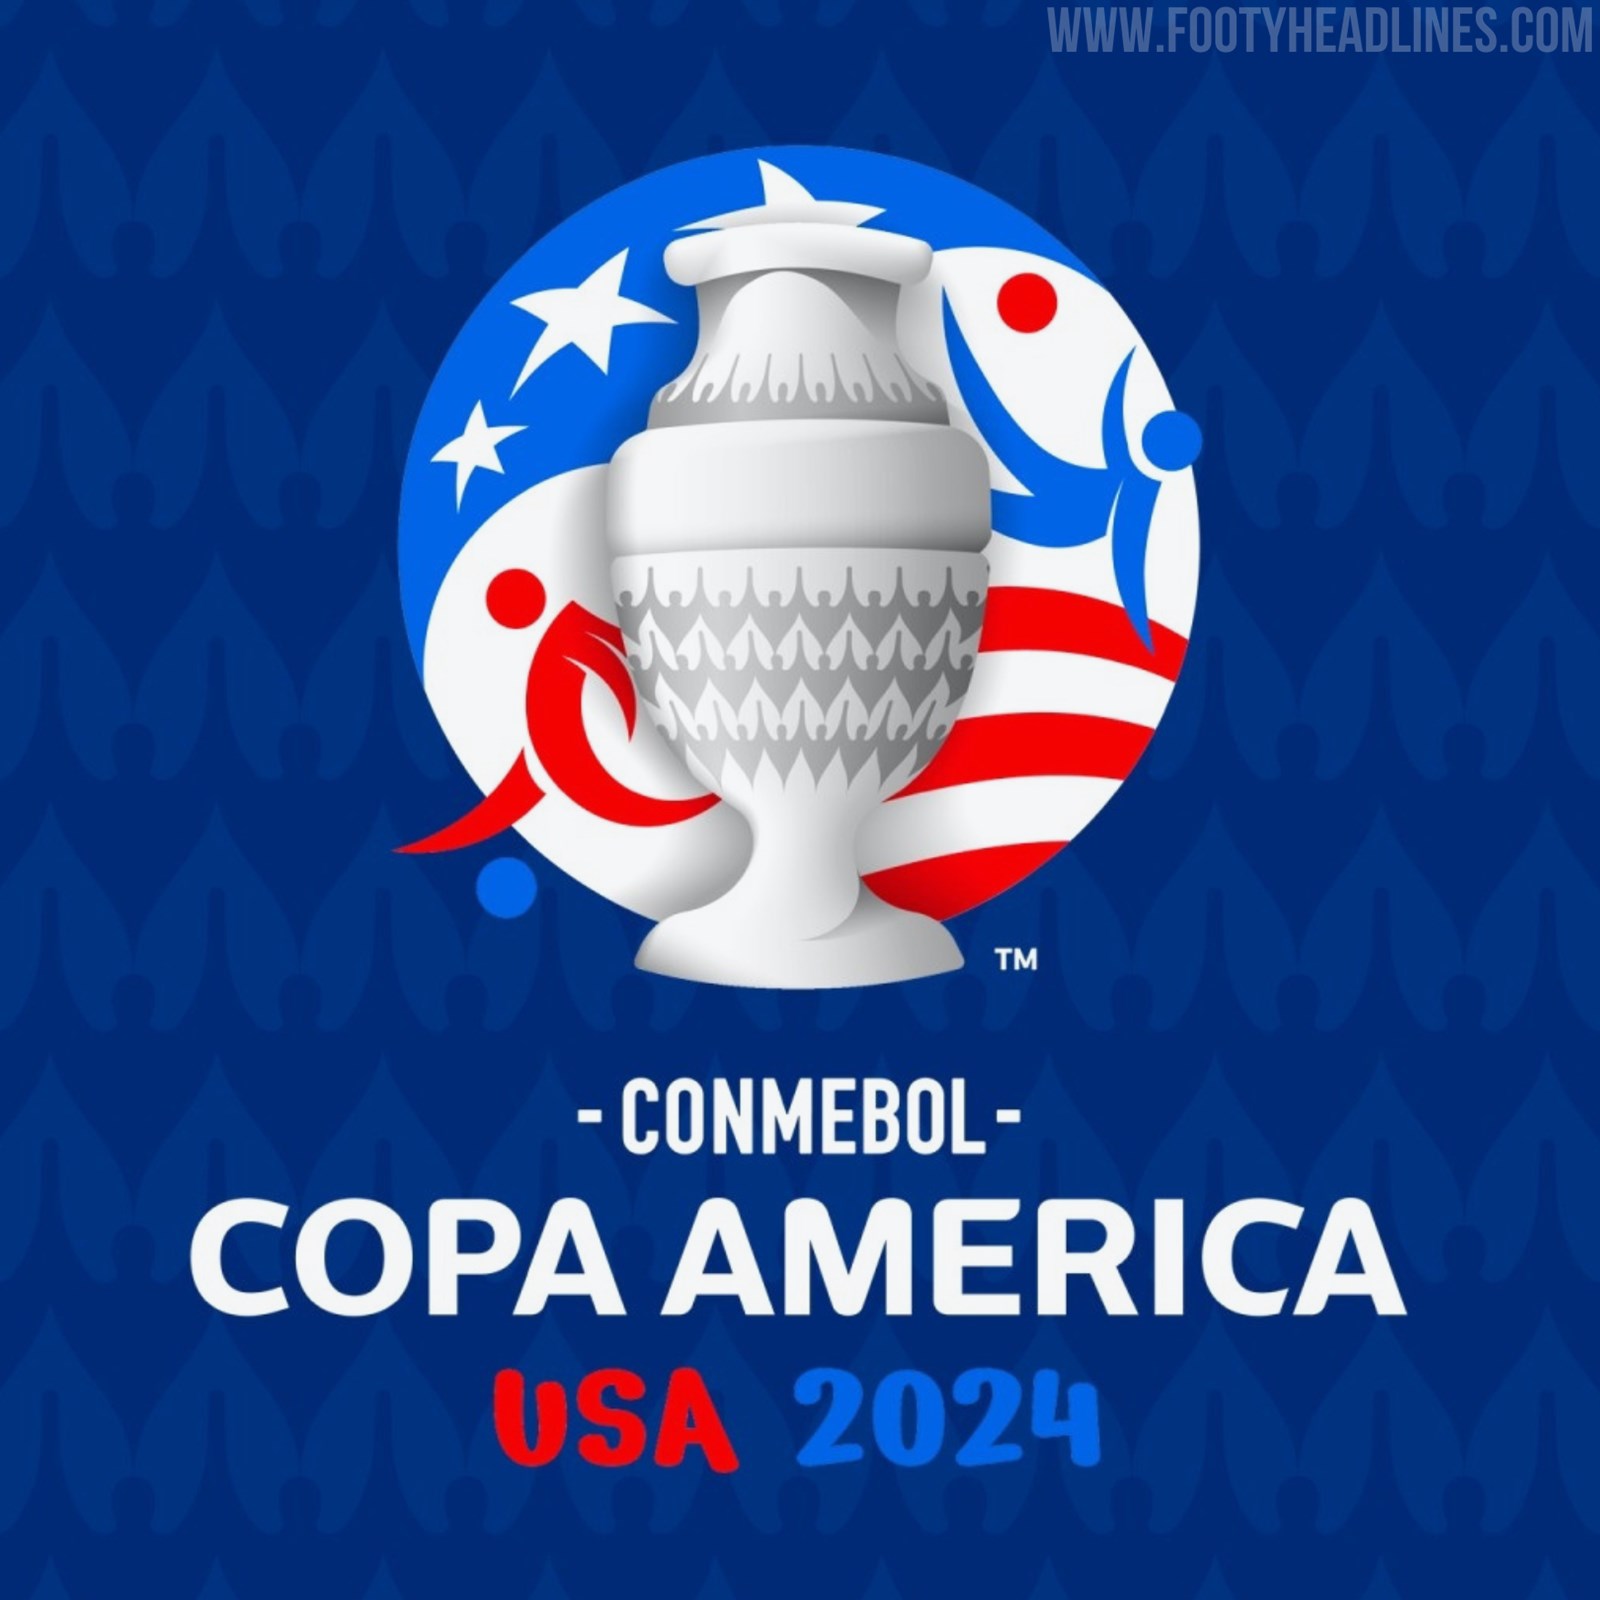 Copa América 2024 to be hosted in USA